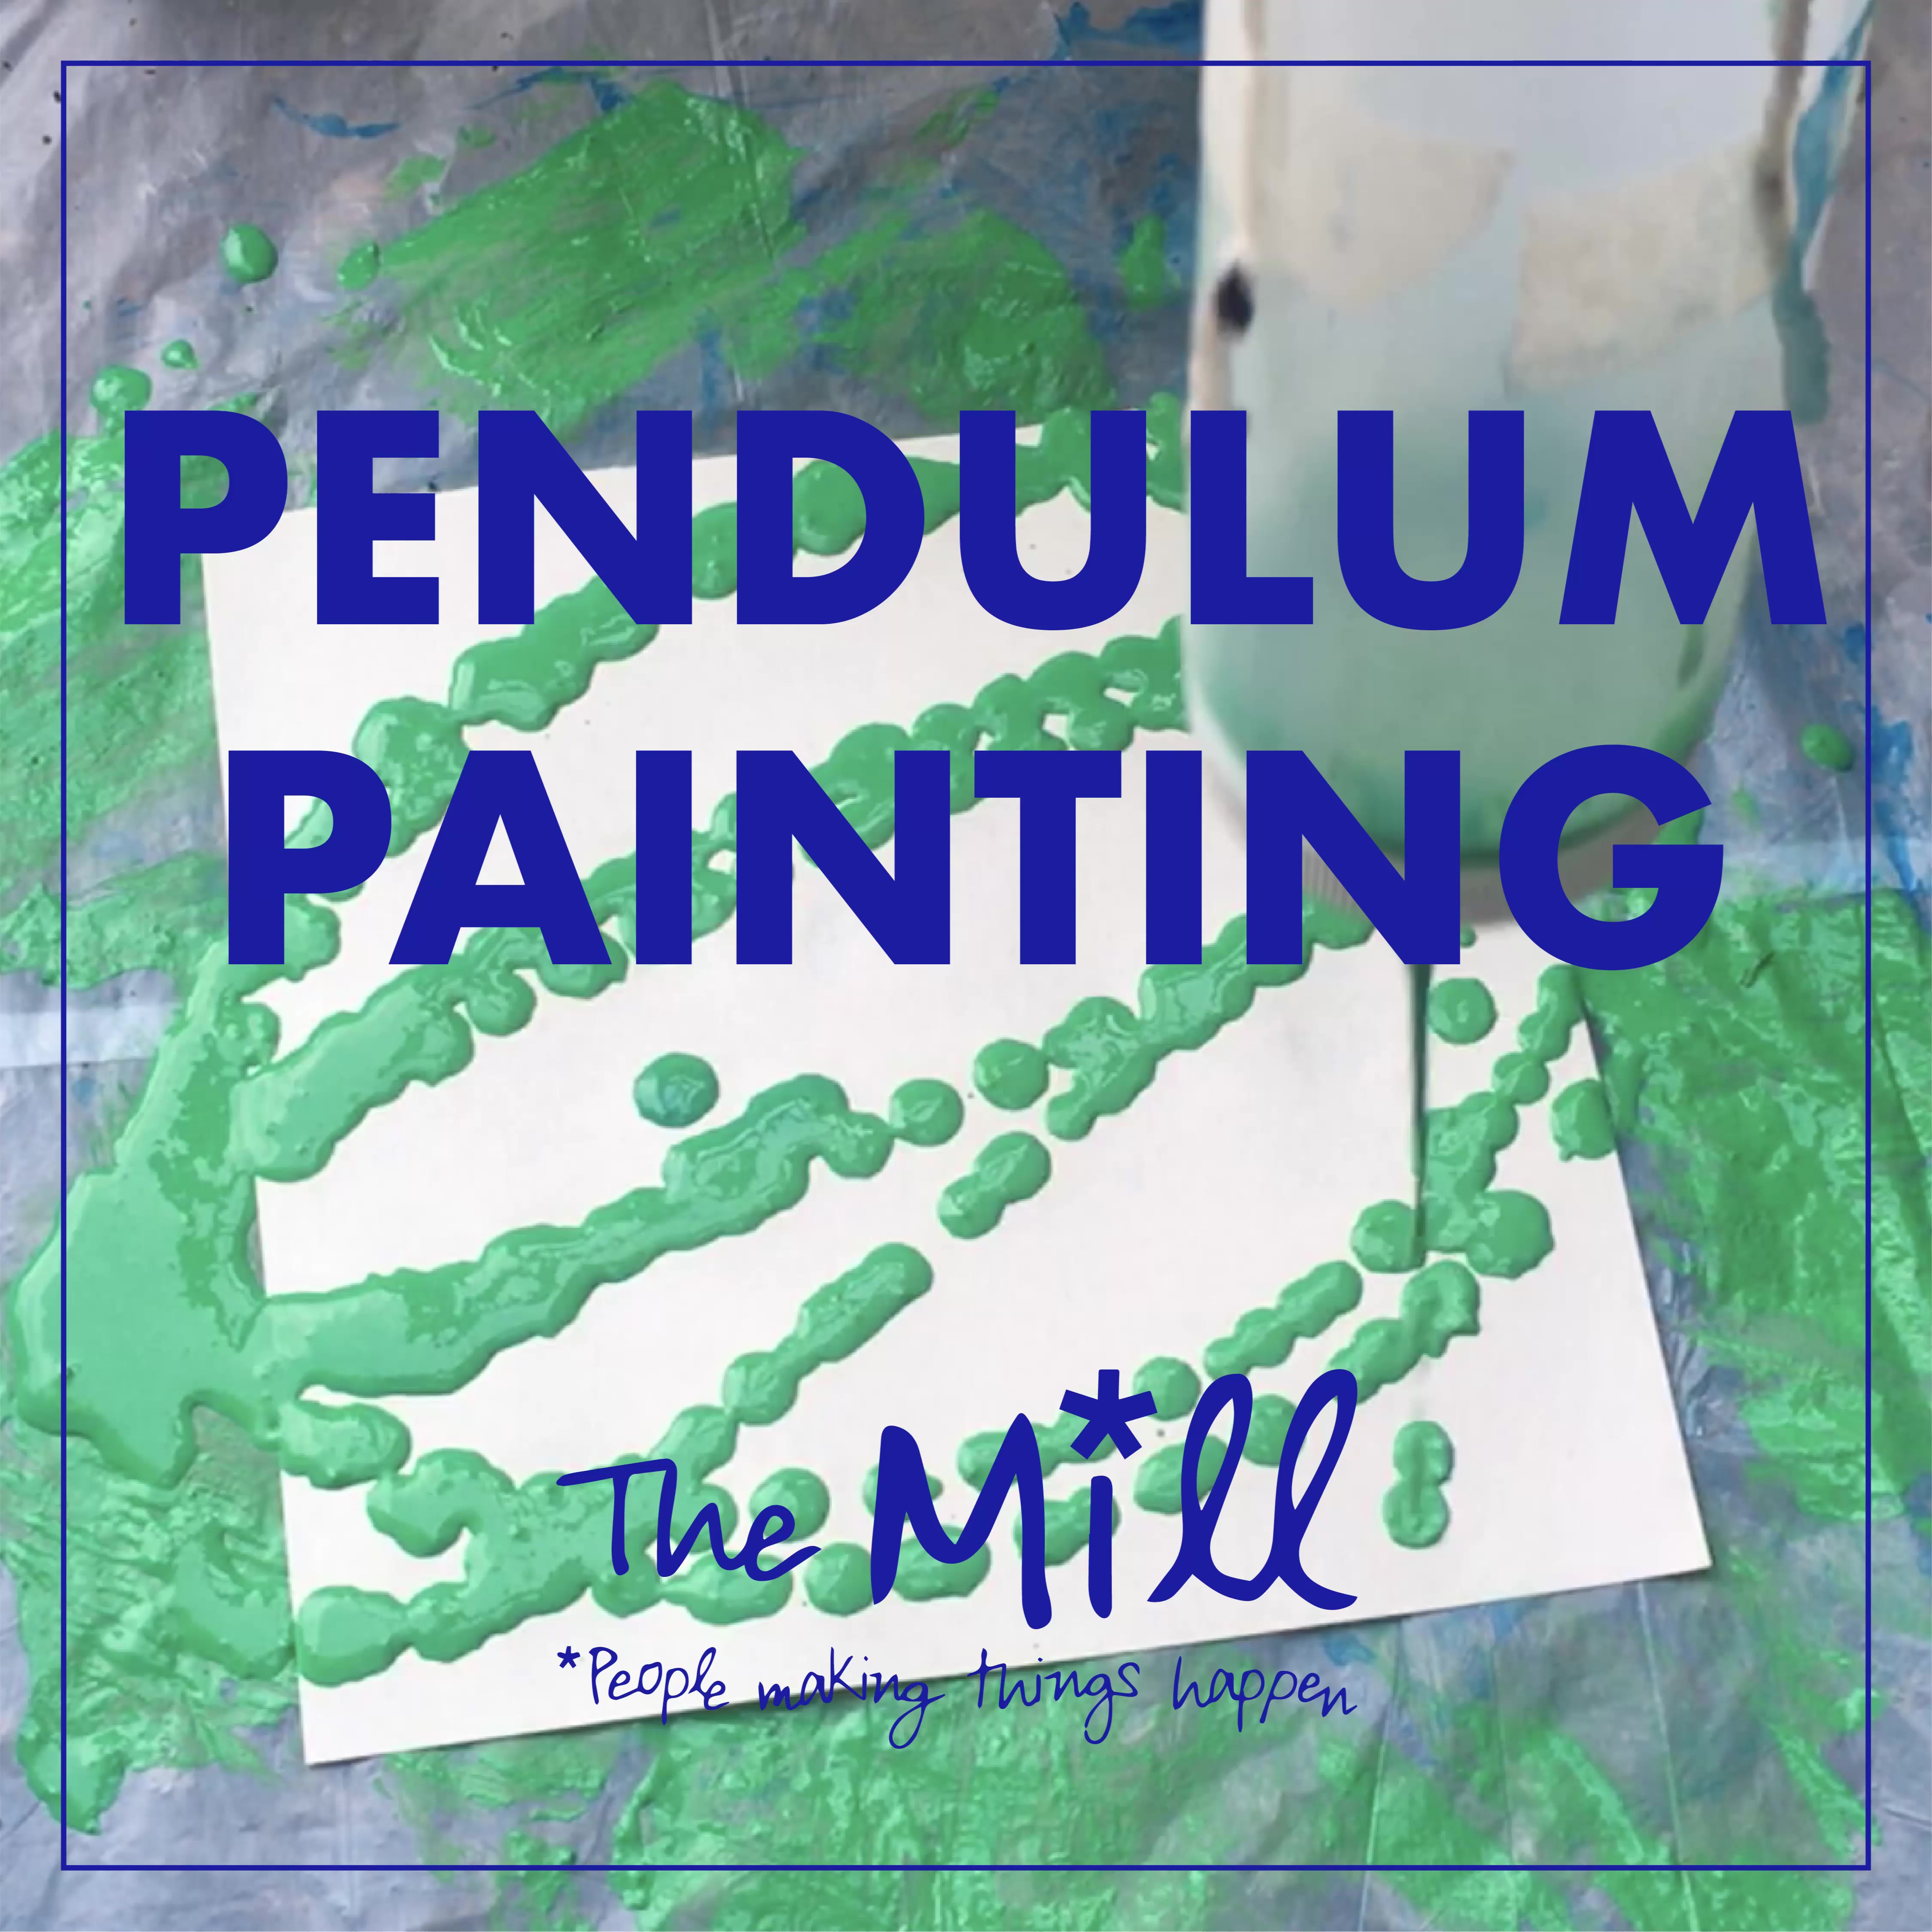 Pendulum Painting video title page